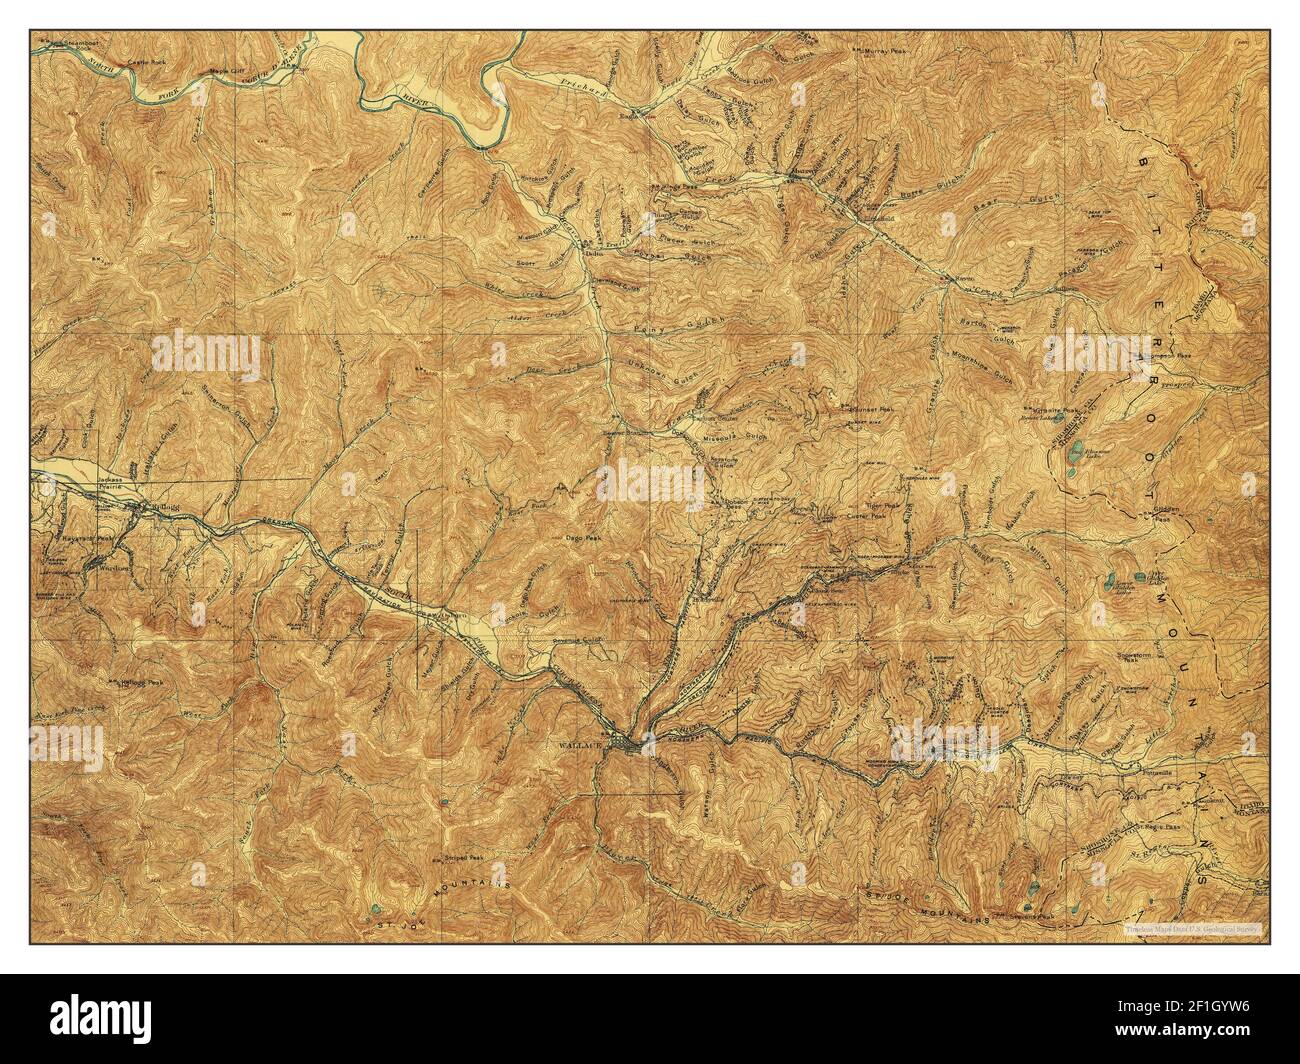 Coeur DAlene District, Idaho, map 1906, 1:62500, United States of America by Timeless Maps, data U.S. Geological Survey Stock Photo